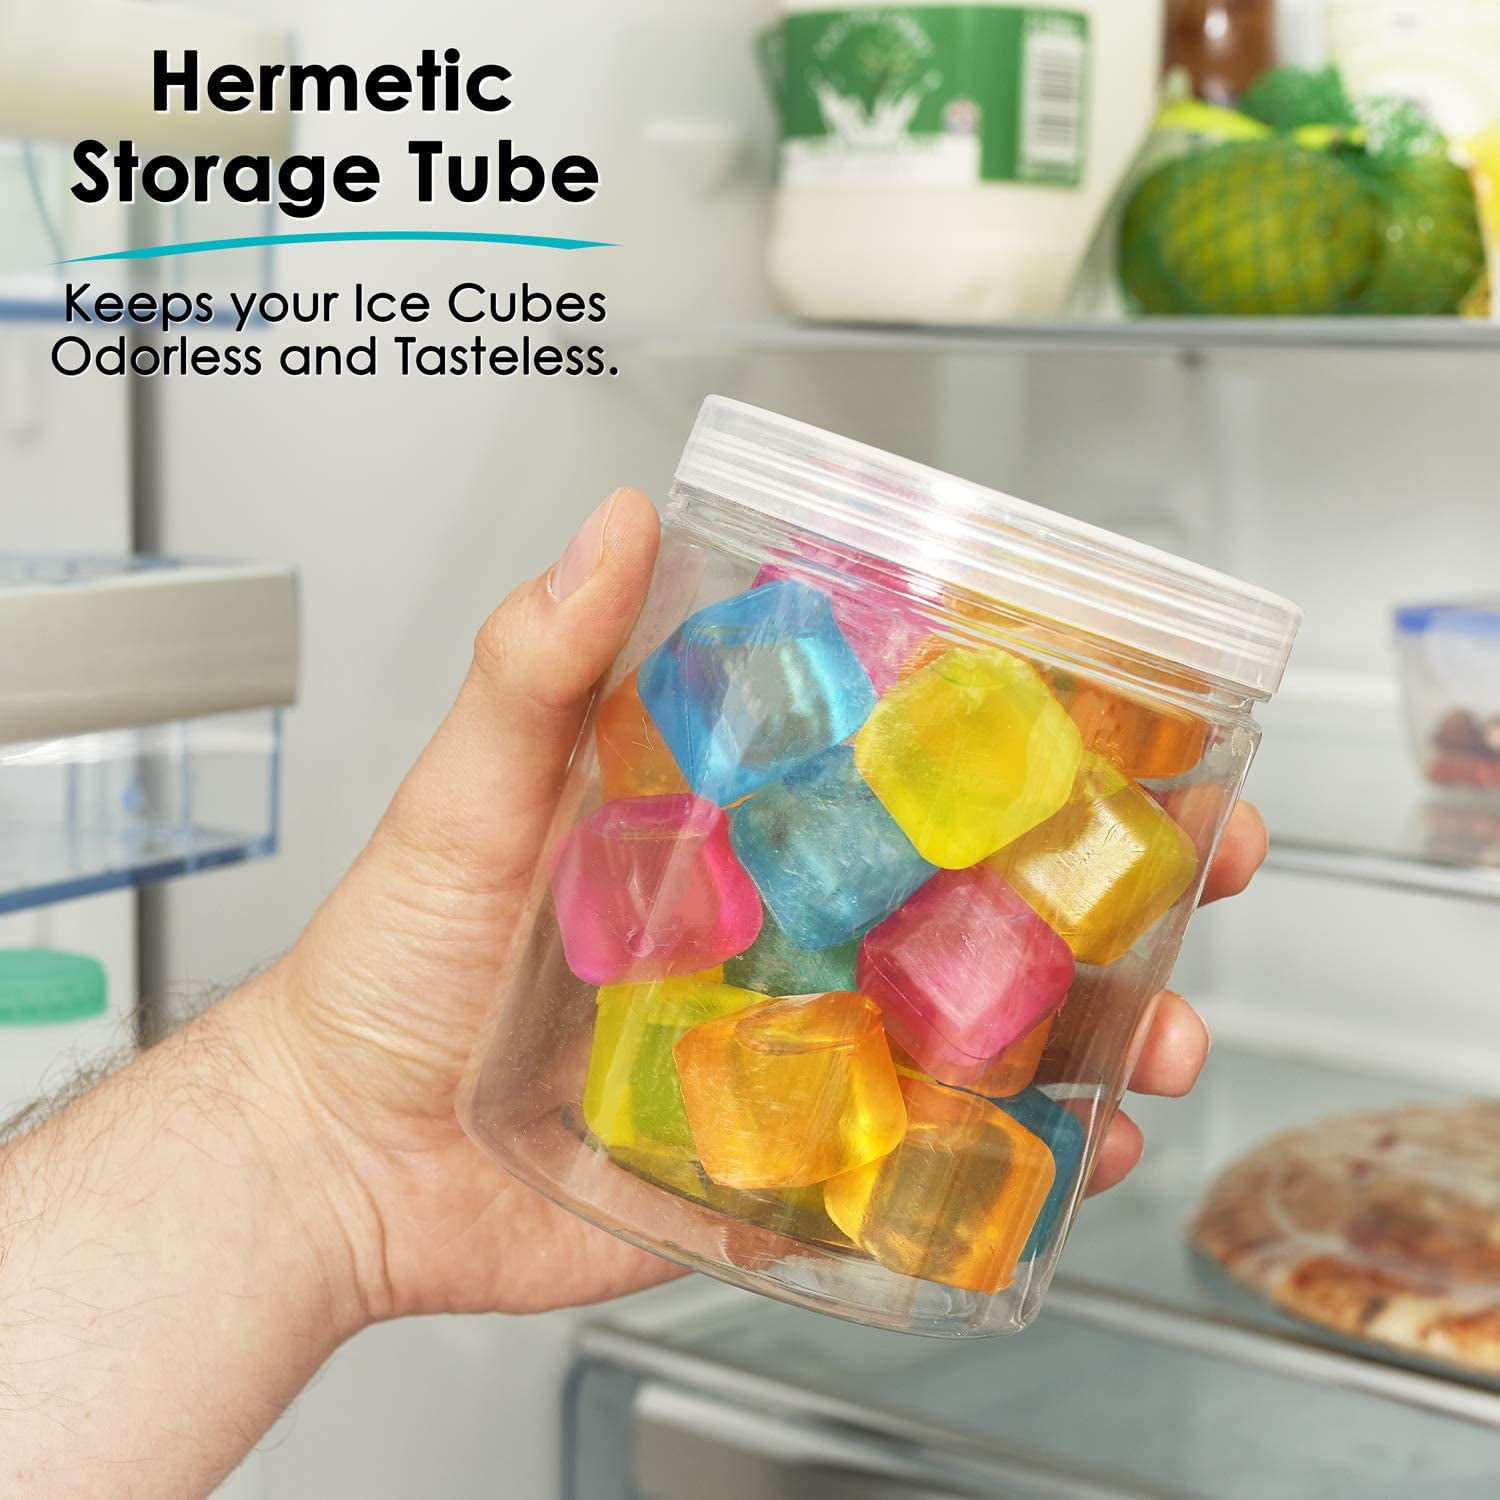 Instant Ice - ICE CUP from Instant Ice are hygienically sealed, pre-filled  with ice cubes takeaway cups. Offering customer the convenience of ice on  the go. #packagedice #icecubes #icecups #foryouriceonly #instantice  #tubeice